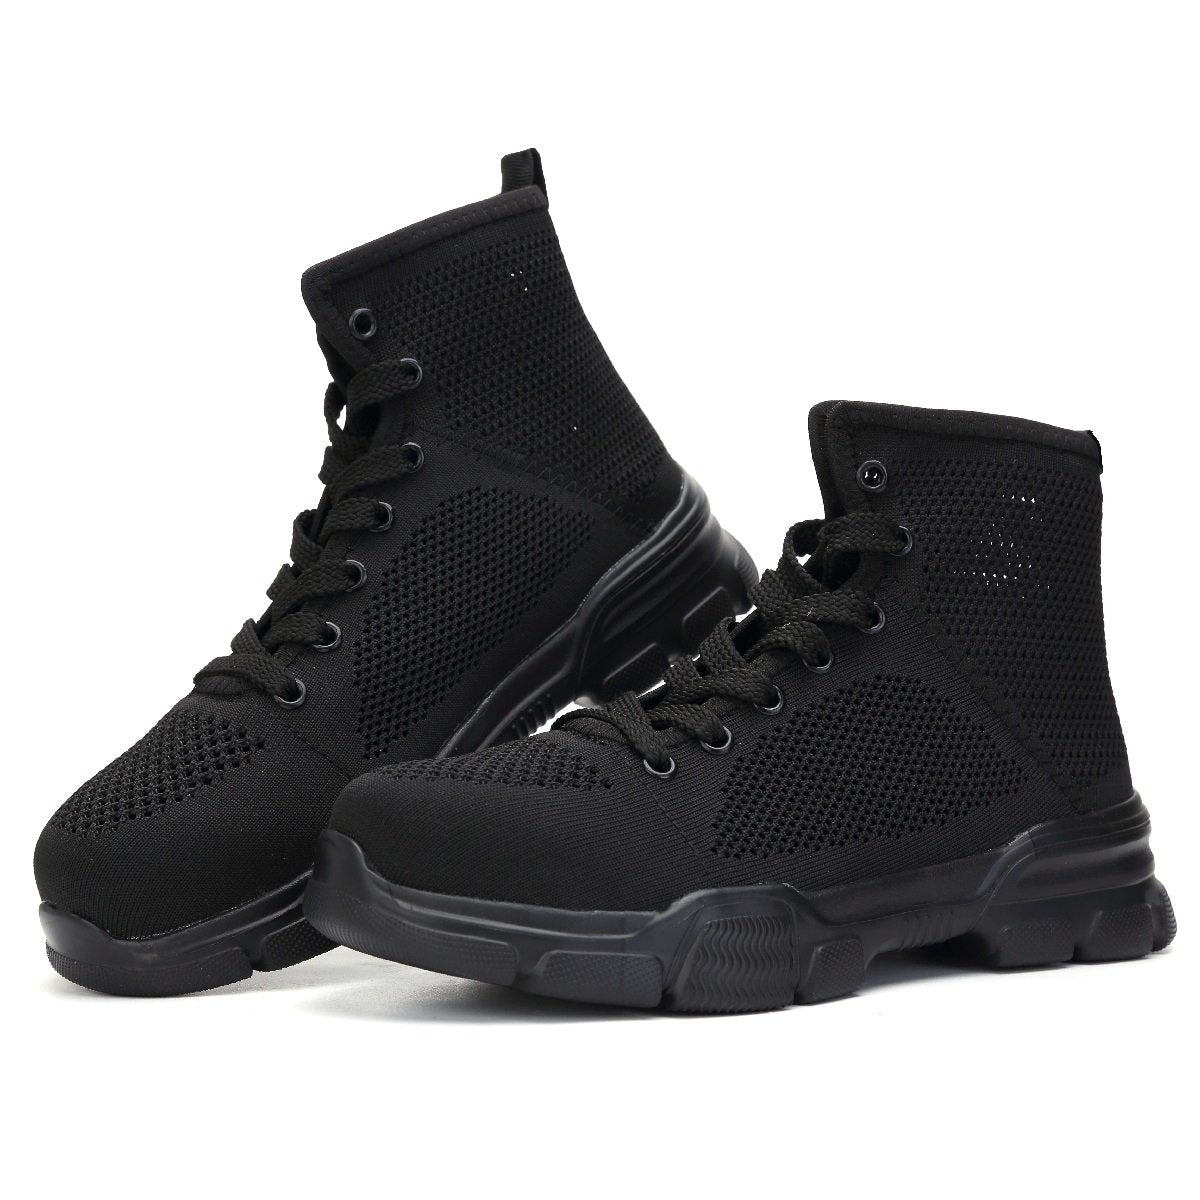 All-in-one Summer Safety Boots – The 